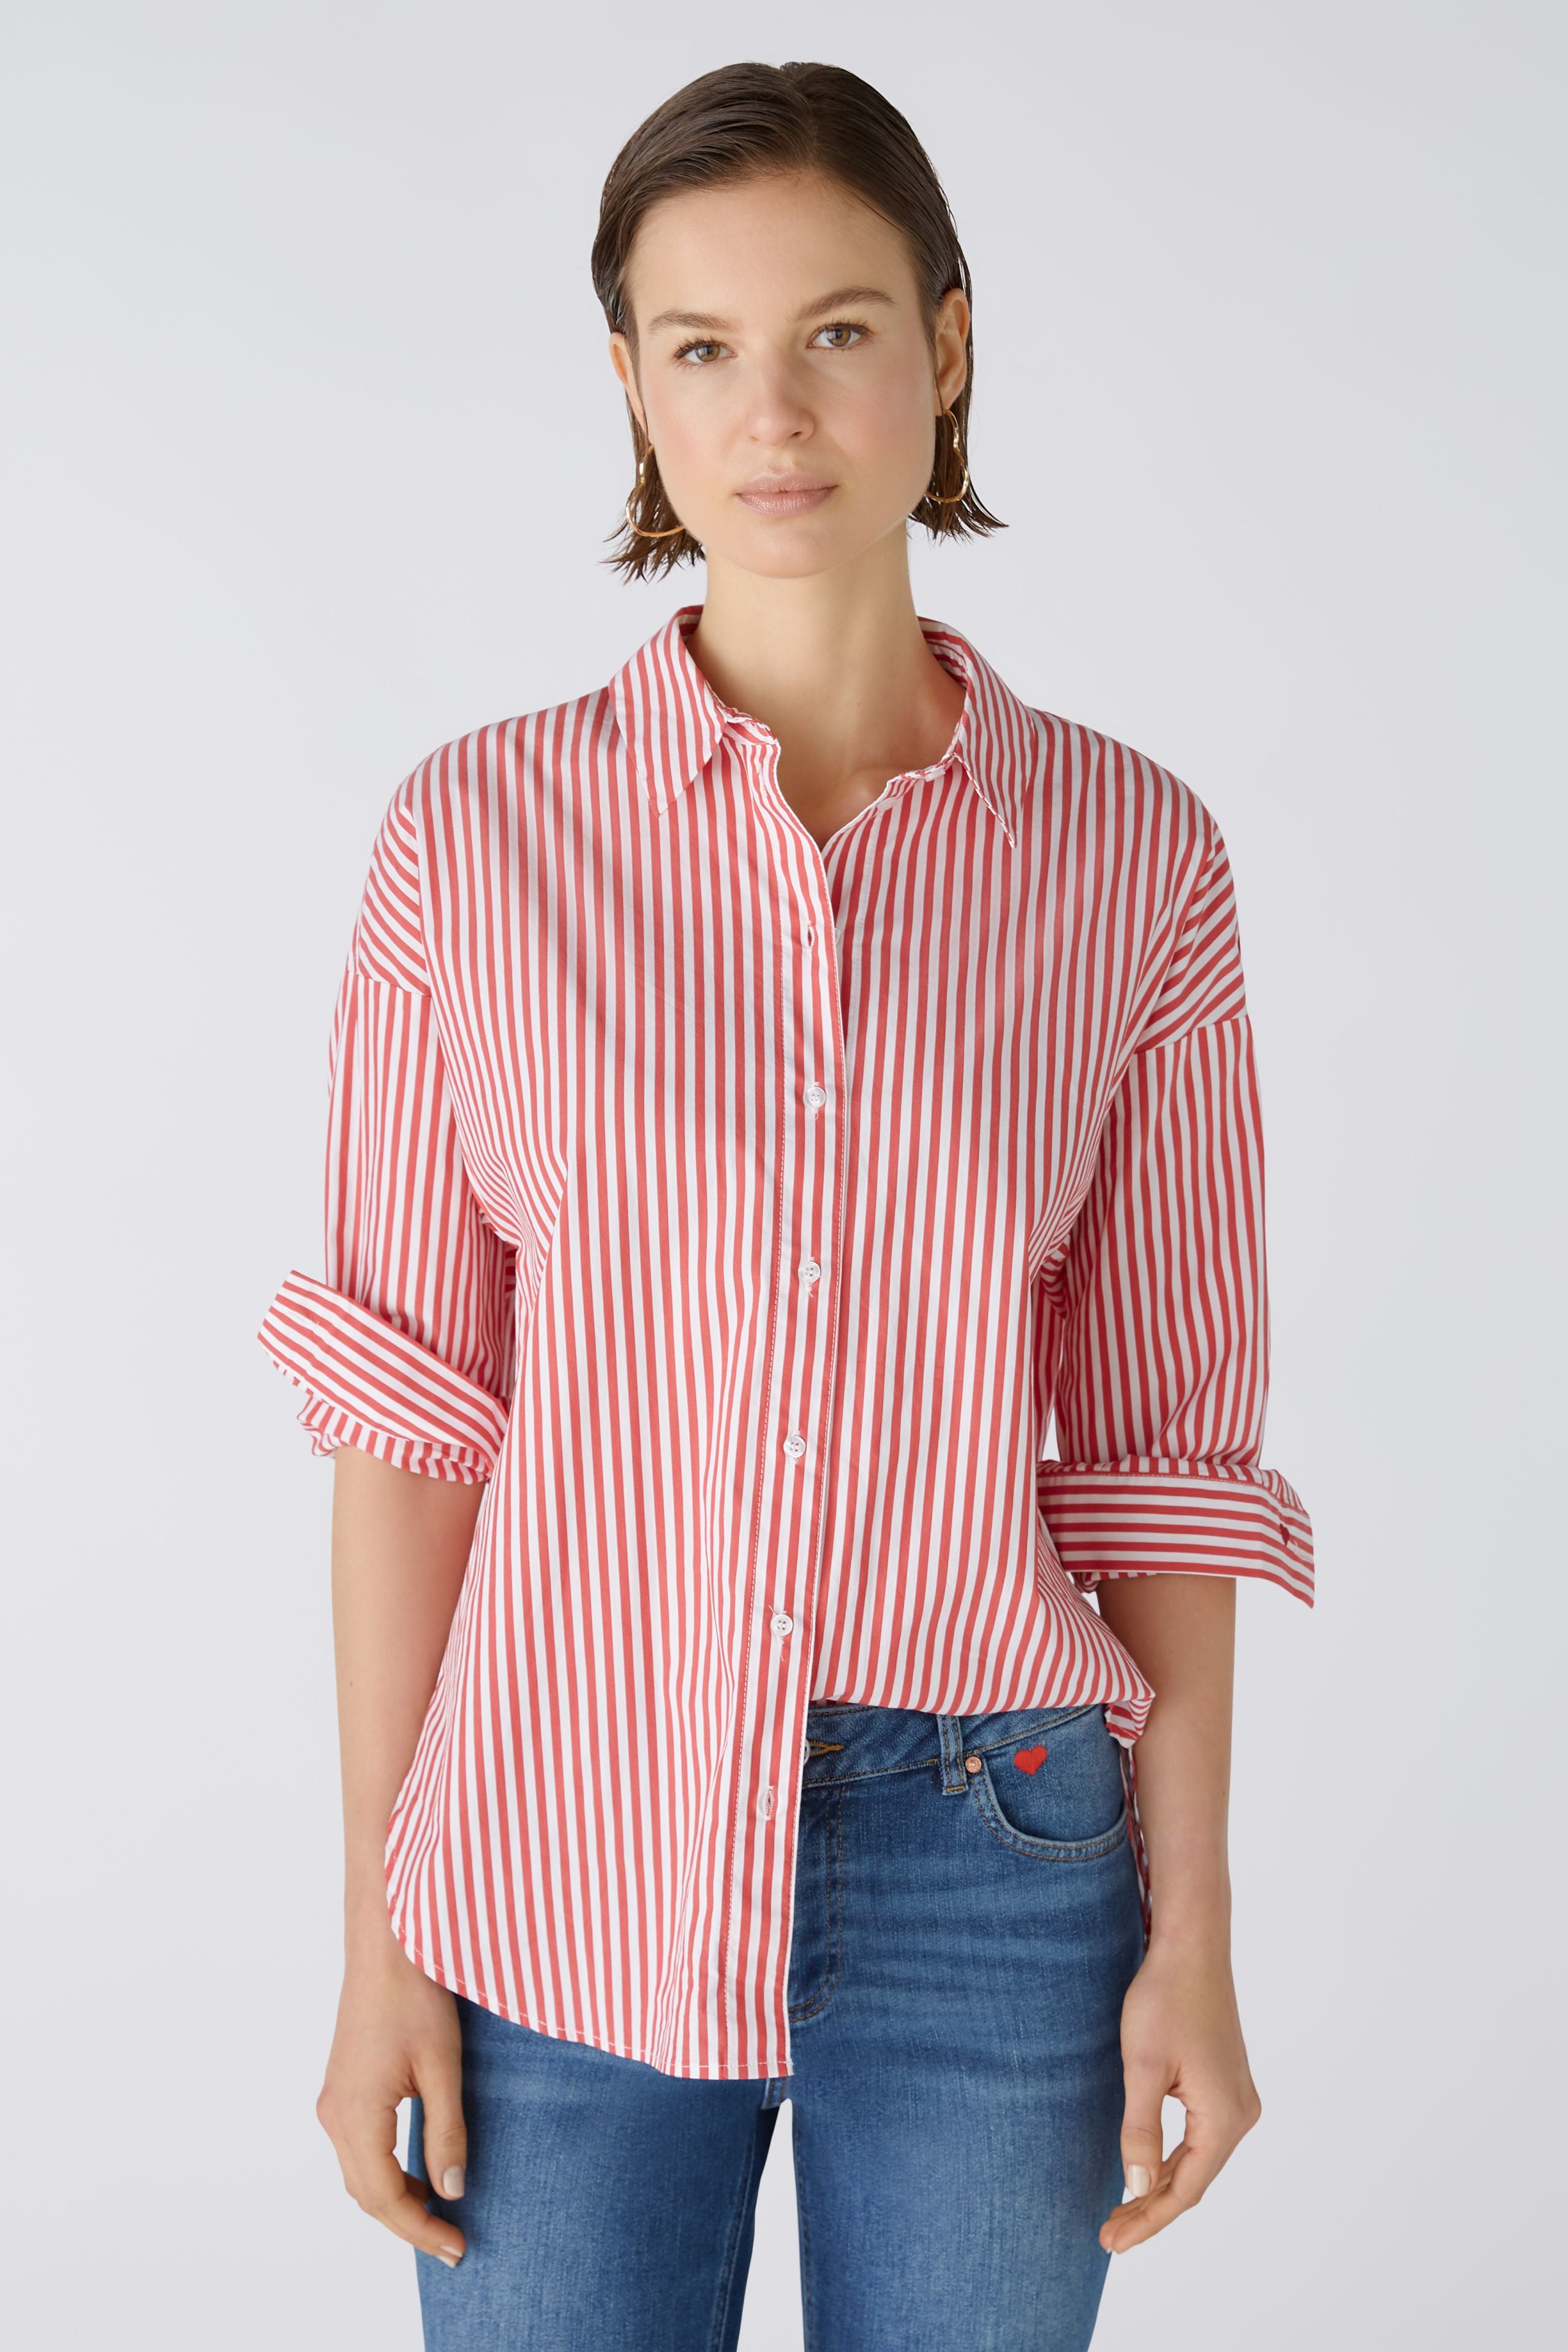 Stripe Shirt in Red/White